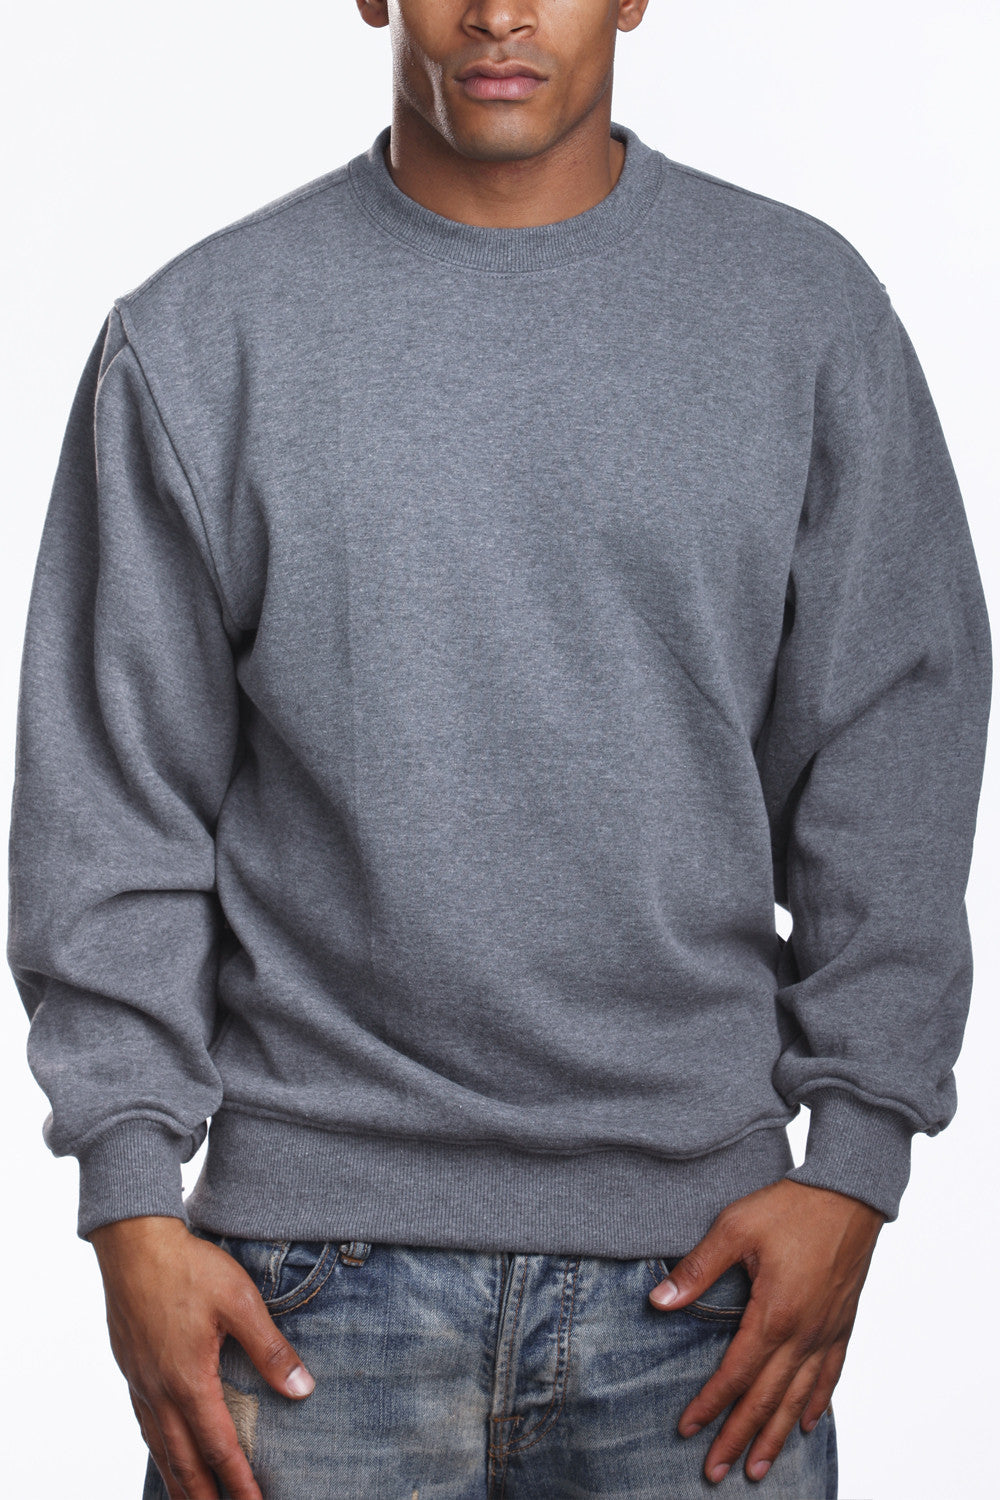 Fleece Crew Neck Dark Grey Sweatshirt: Elevate comfort with Pro 5 style. Sturdy, heavy-weight. Sizes S-XL. Classic colors. 60% Cotton 40% Polyester blend. Size tip: Choose one size smaller for snug fit.